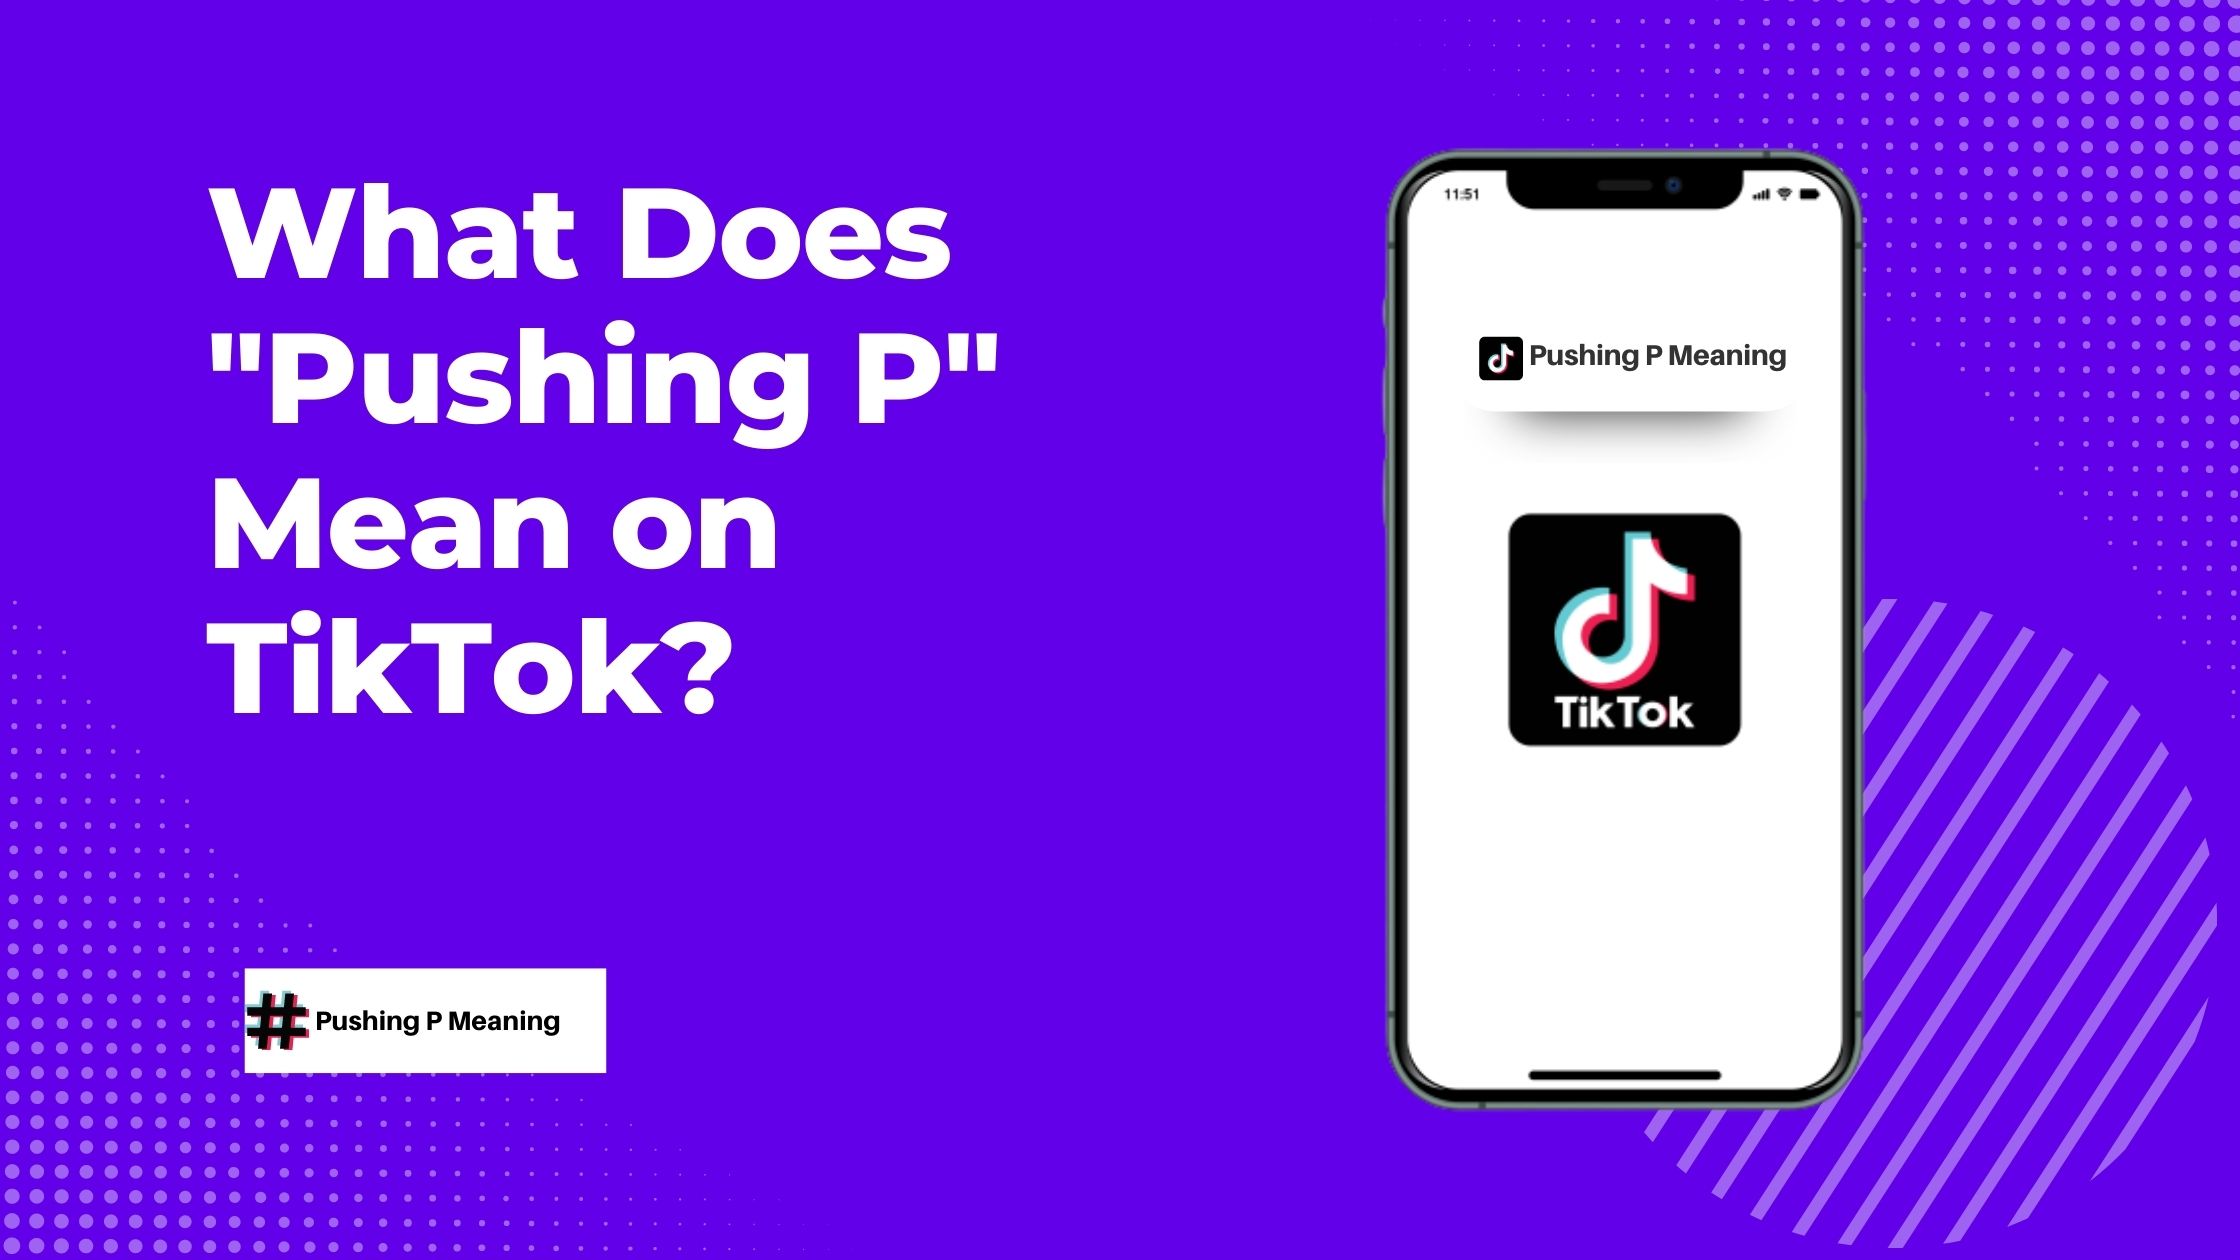 What is the meaning of “Pushing P” on TikTok